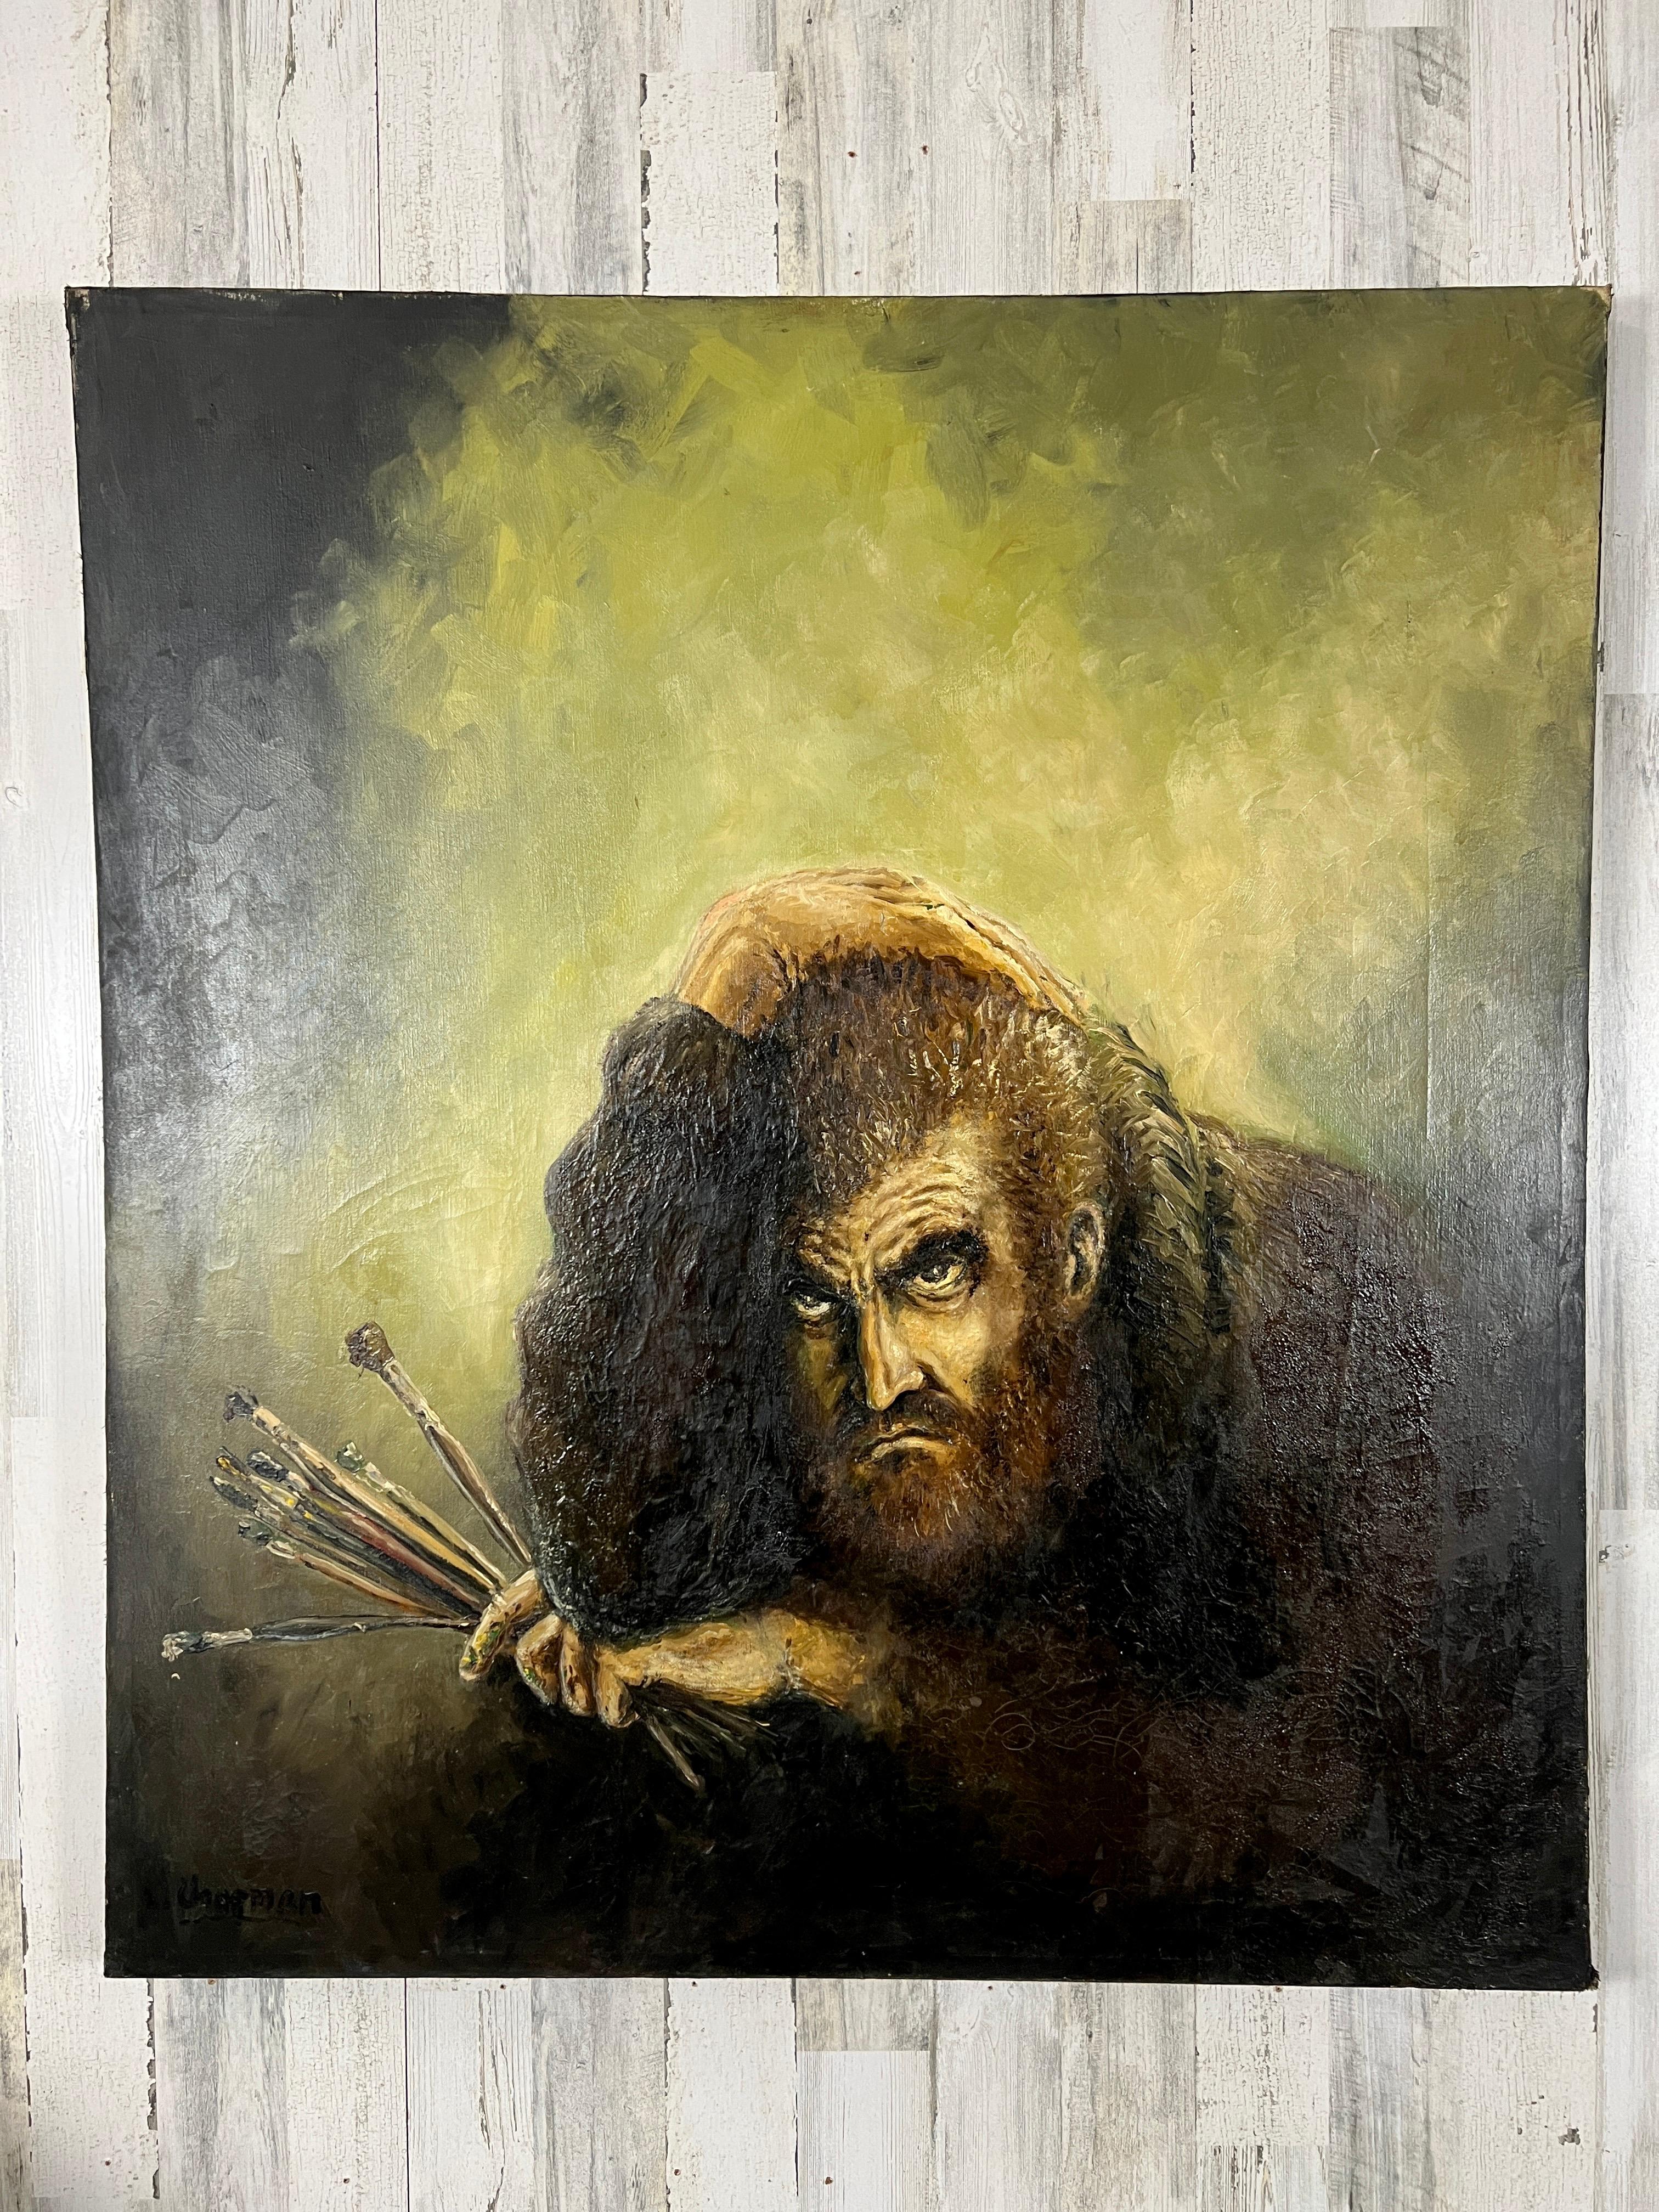 Very rustic canvas on a wood frame painting of a man seemingly frustrated with his own work, signed l. Chapman.